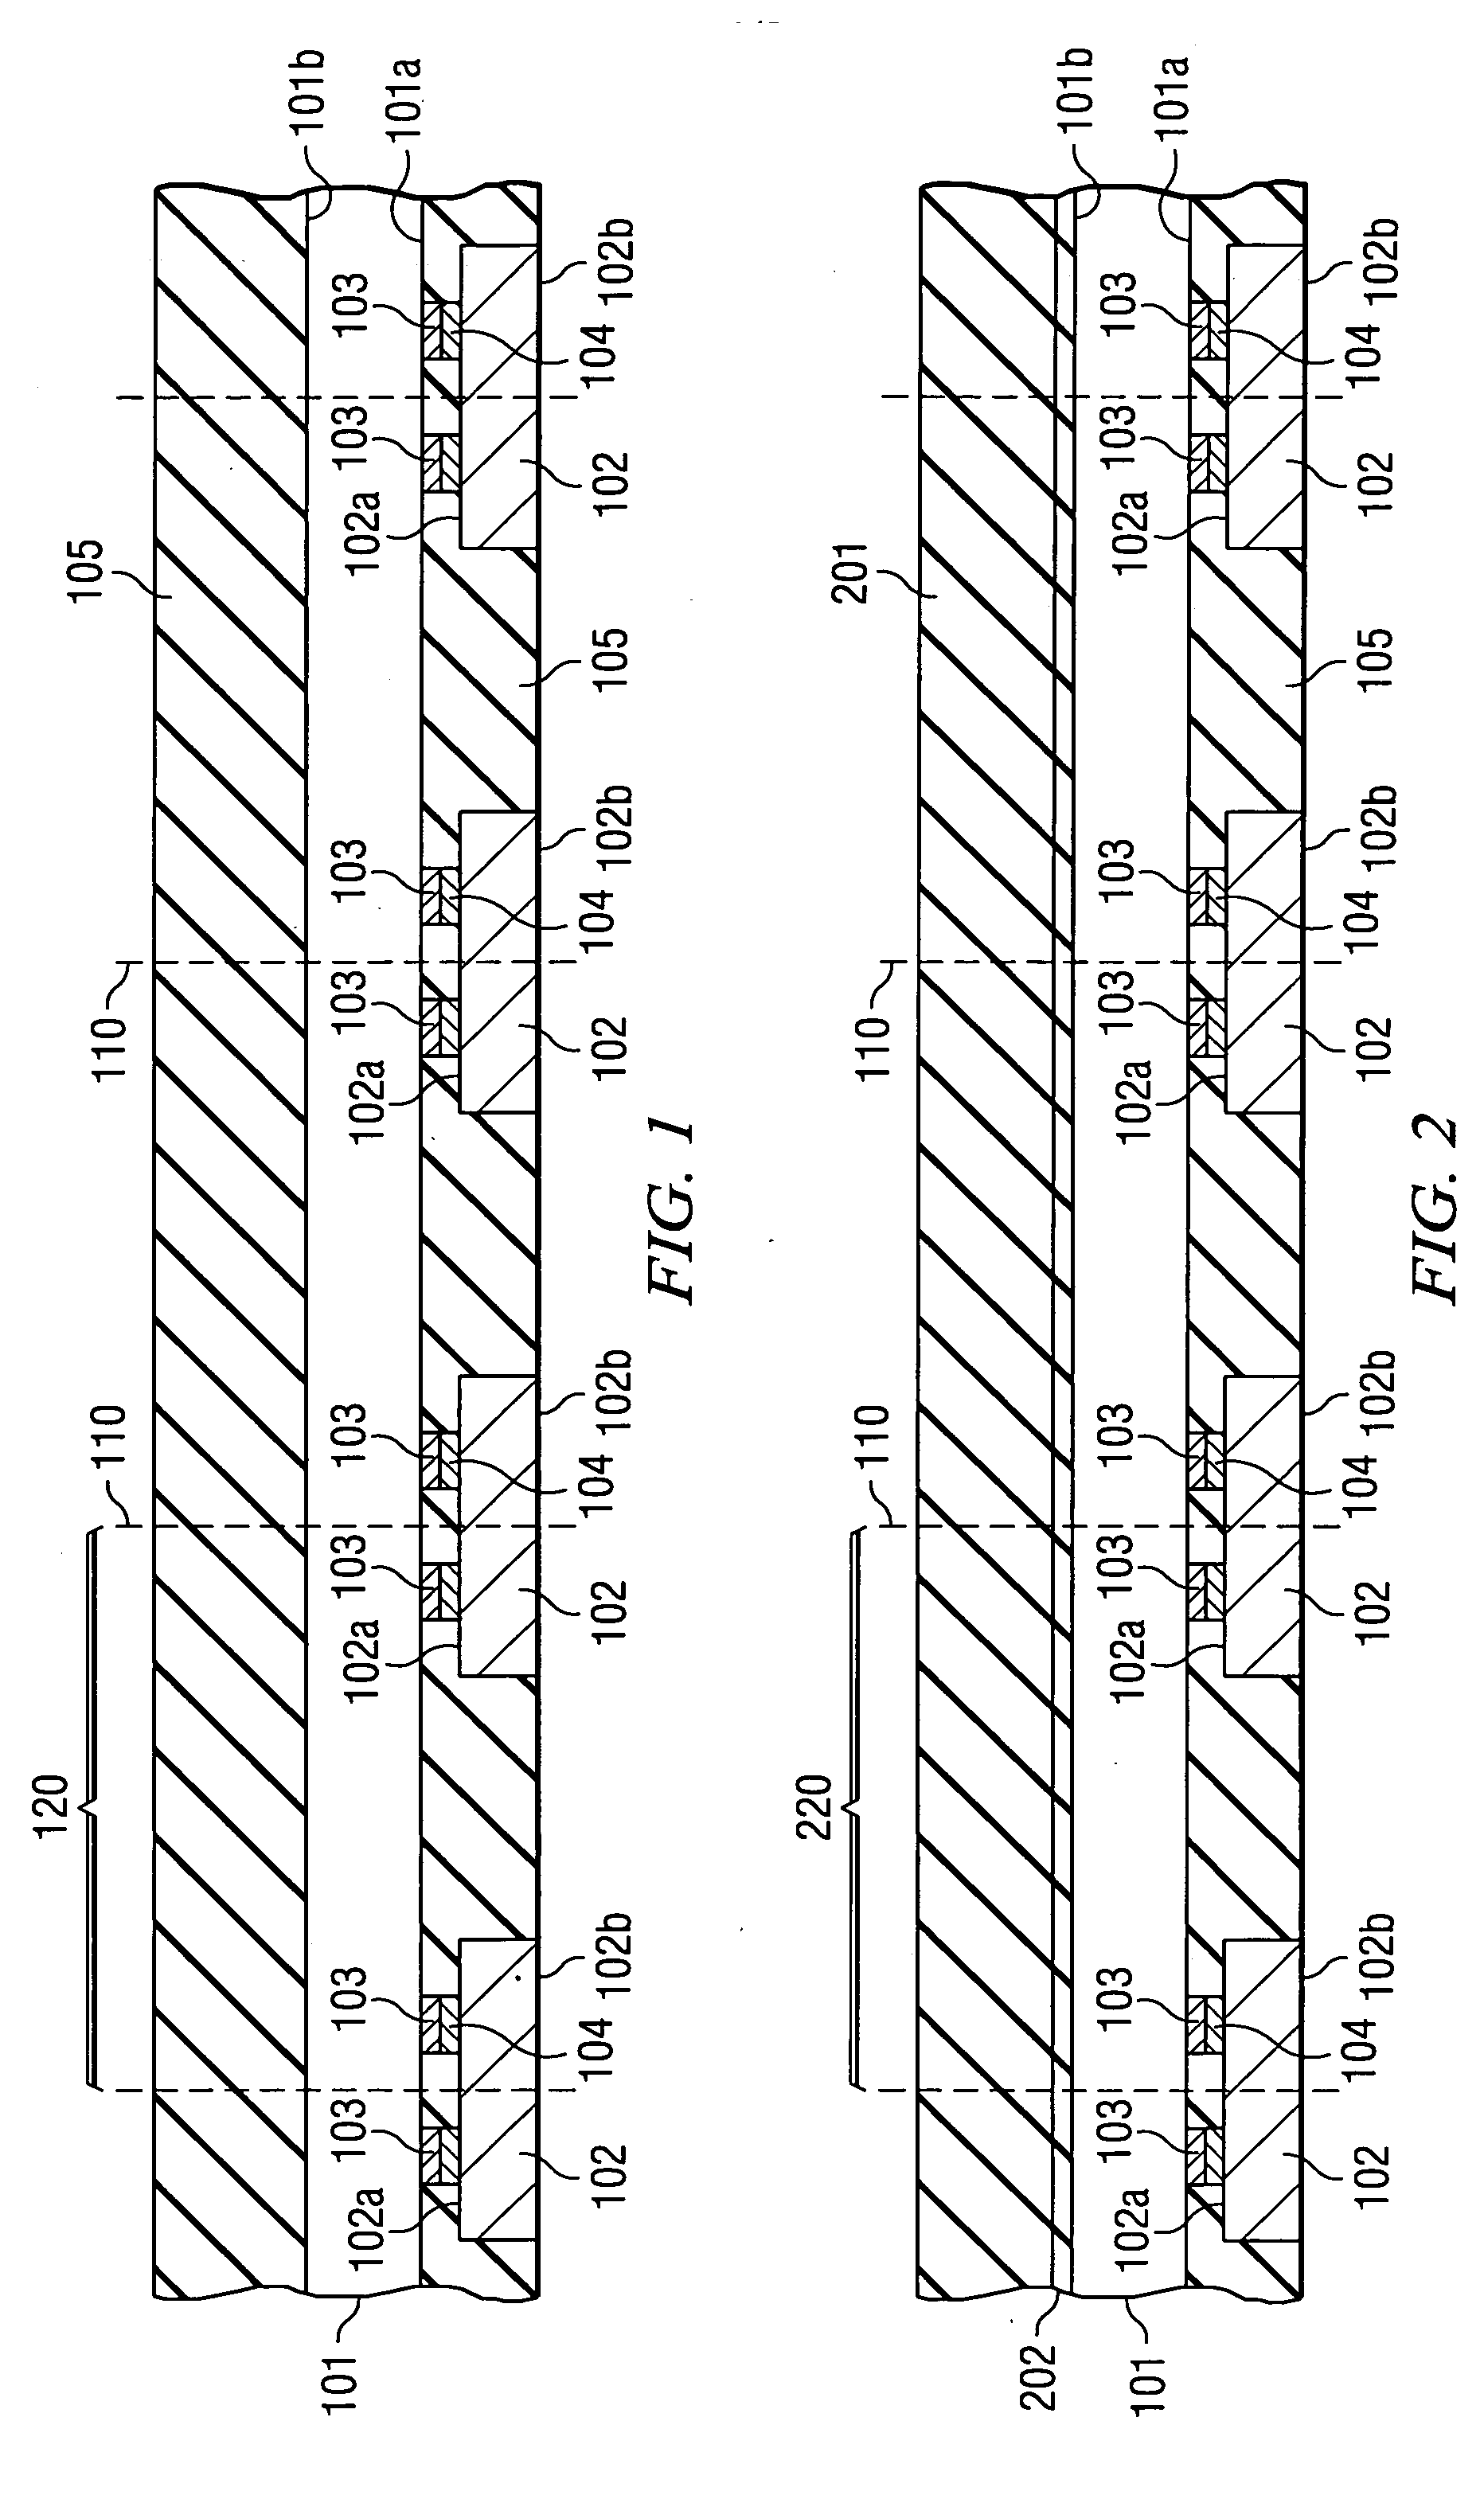 Wafer-level assembly method for chip-size devices having flipped chips